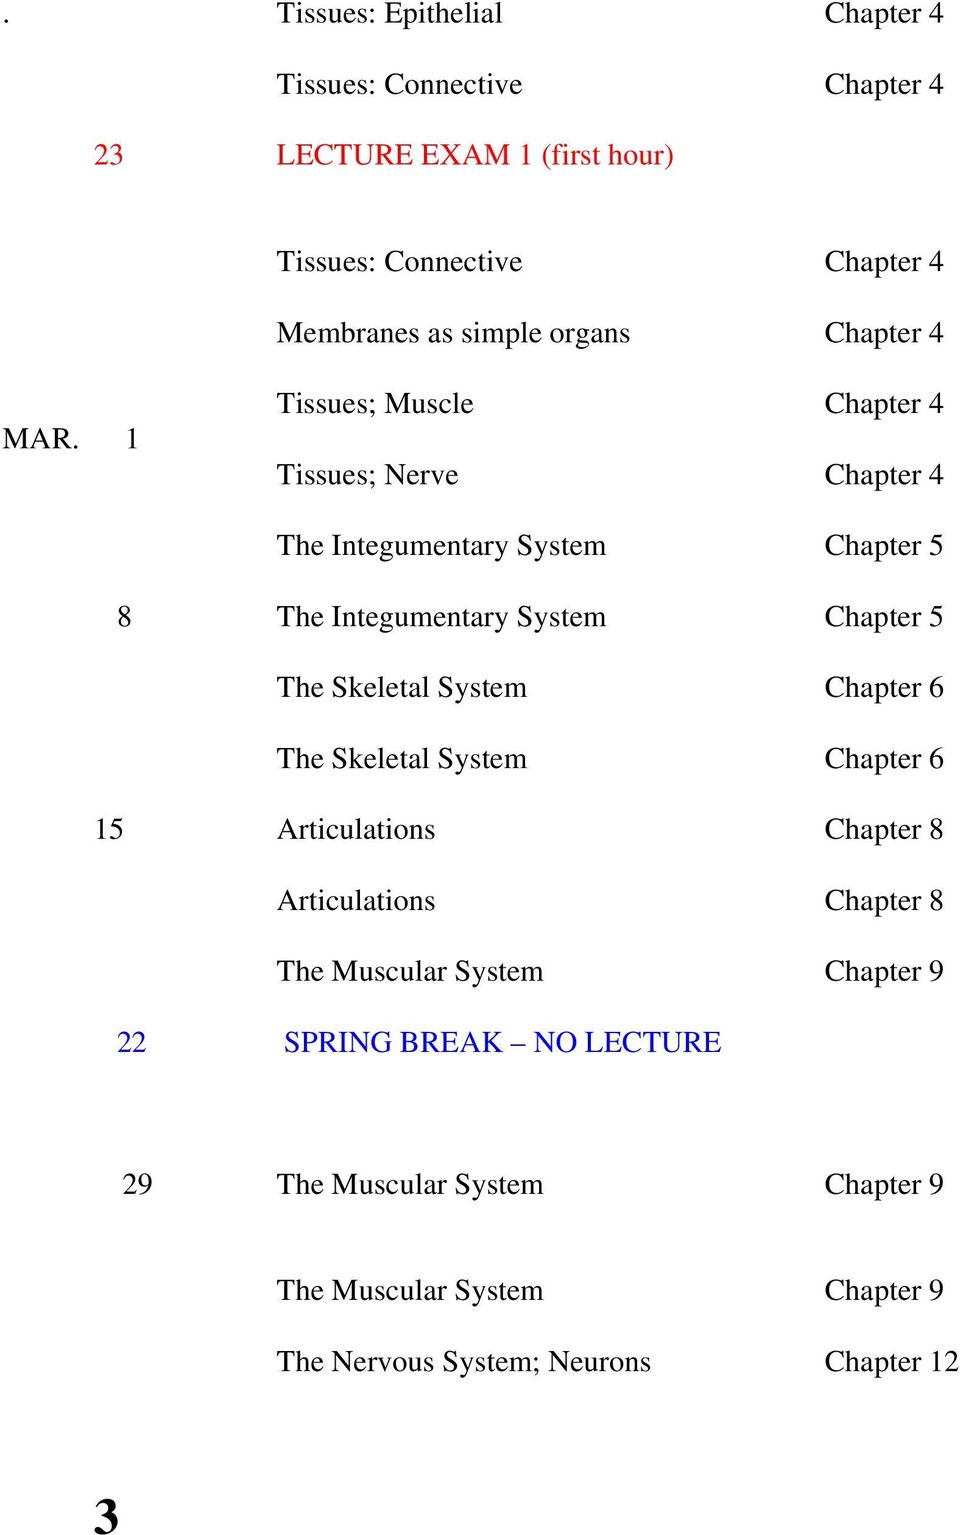 1 Tissues; Muscle Chapter 4 Tissues; Nerve Chapter 4 The Integumentary System Chapter 5 8 The Integumentary System Chapter 5 The Skeletal